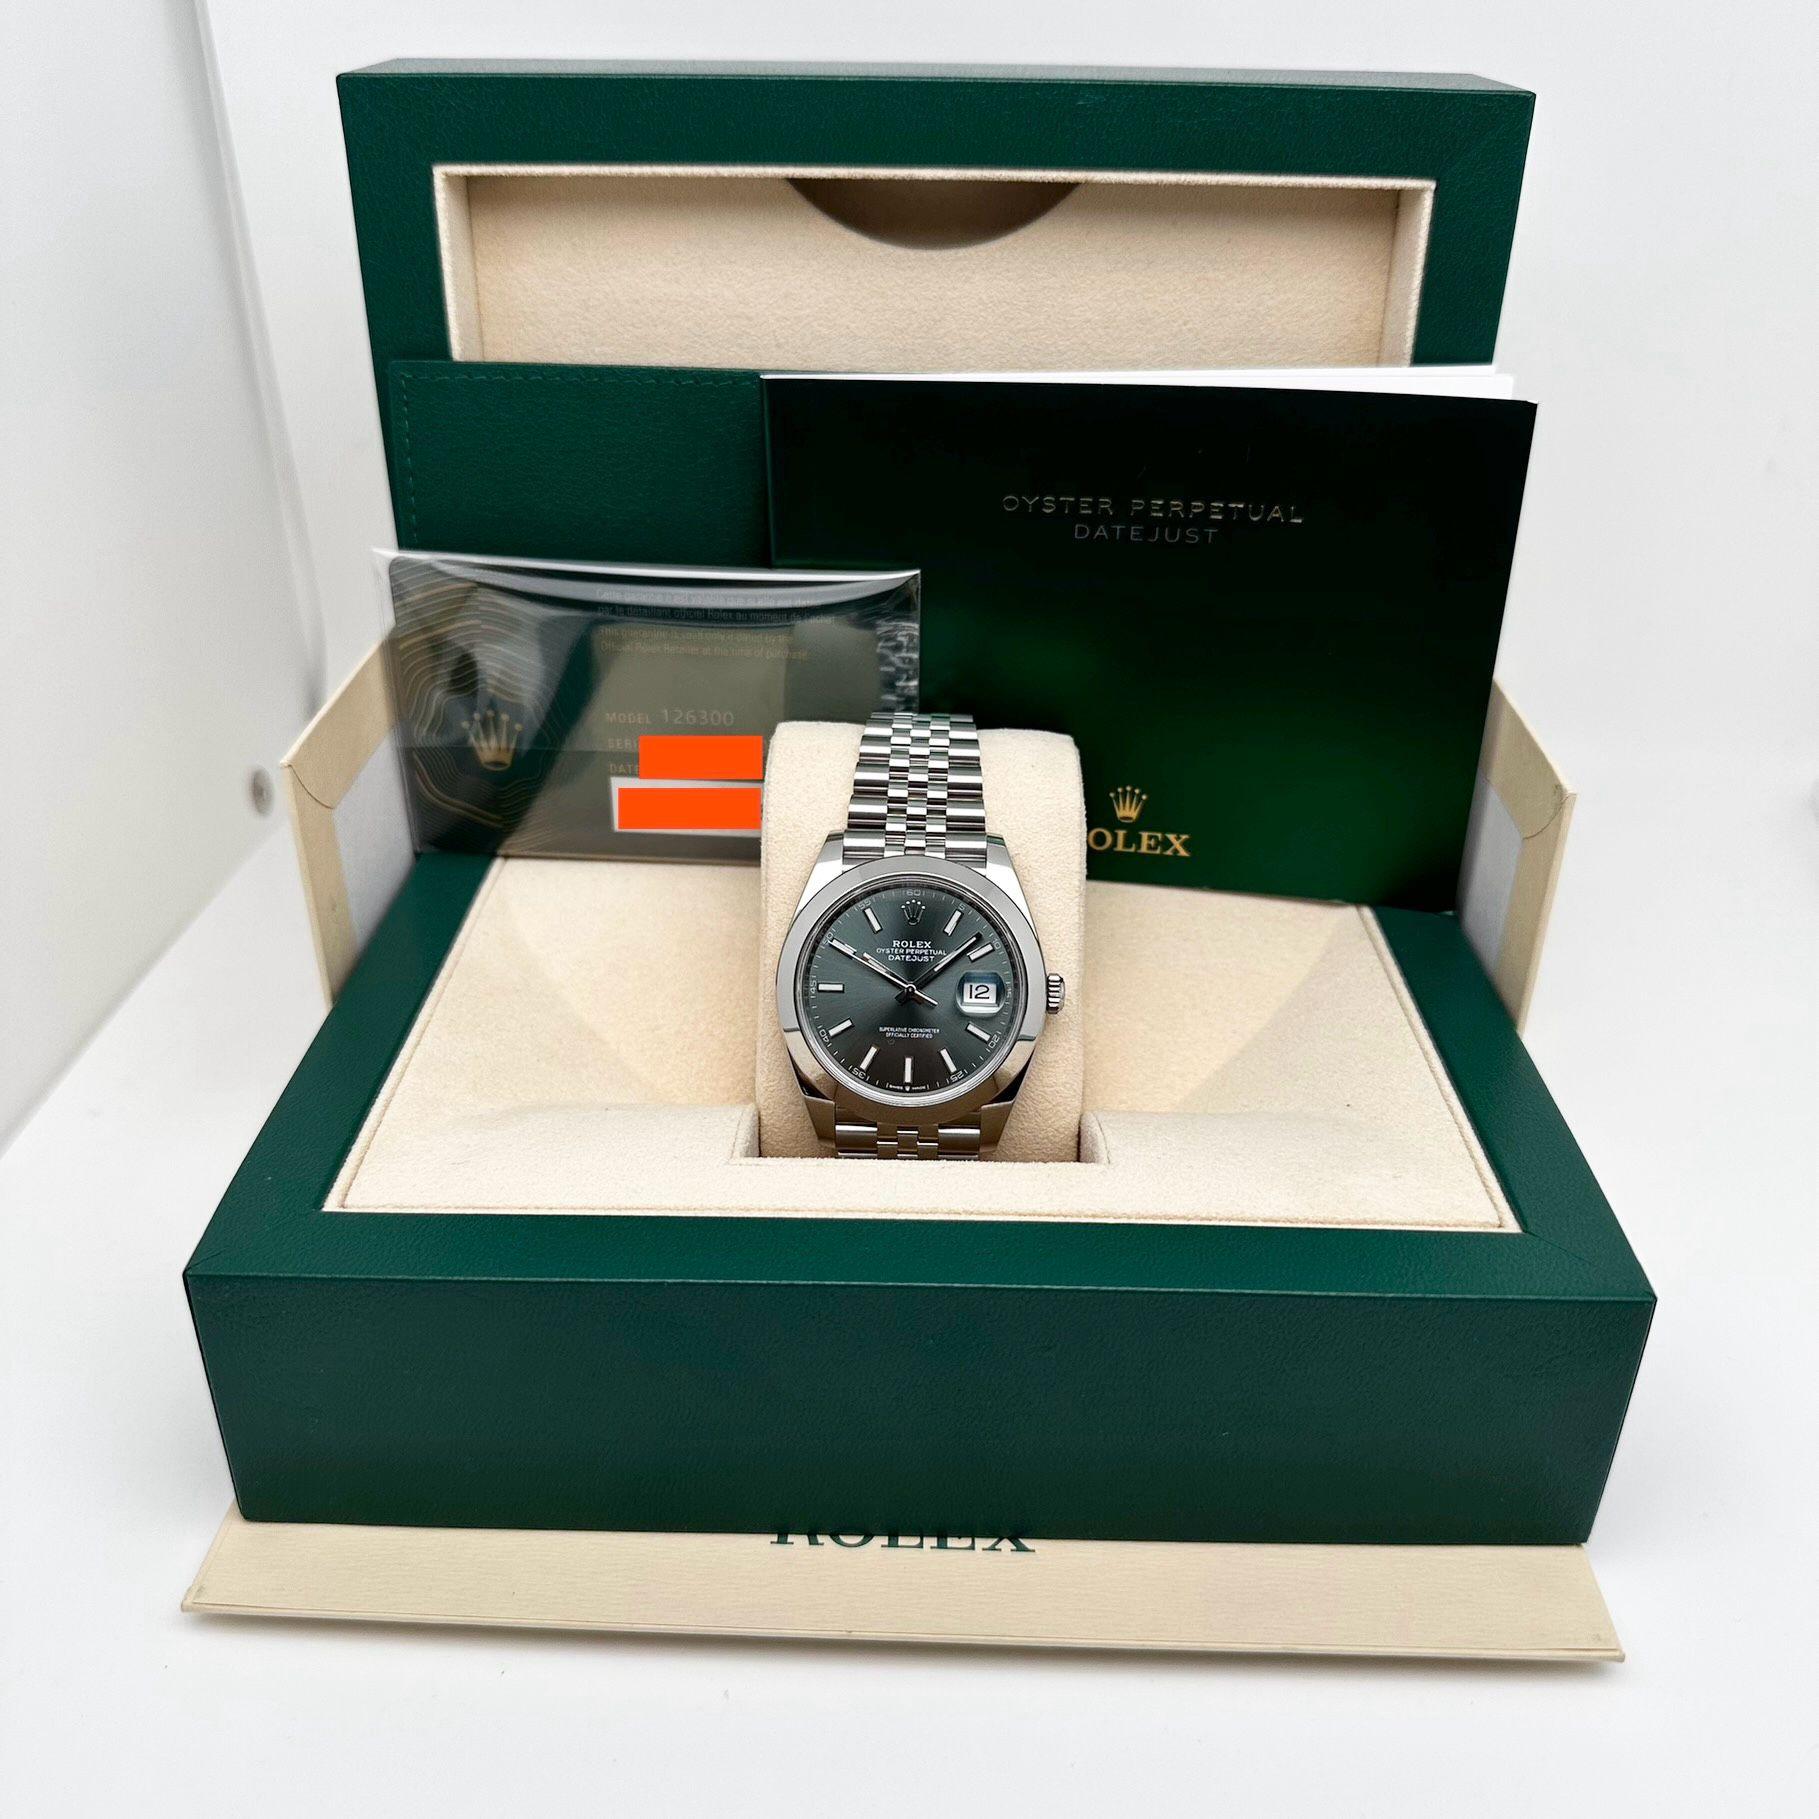 Unworn. Comes with the original box and papers.

Brand: Rolex
Model: Rolex Datejust 126300
Model Number: M126300-0014
Movement: Mechanical (Automatic), Rolex Caliber 3235
Origin: Made in Switzerland
Style: Luxury
Year Manufactured: